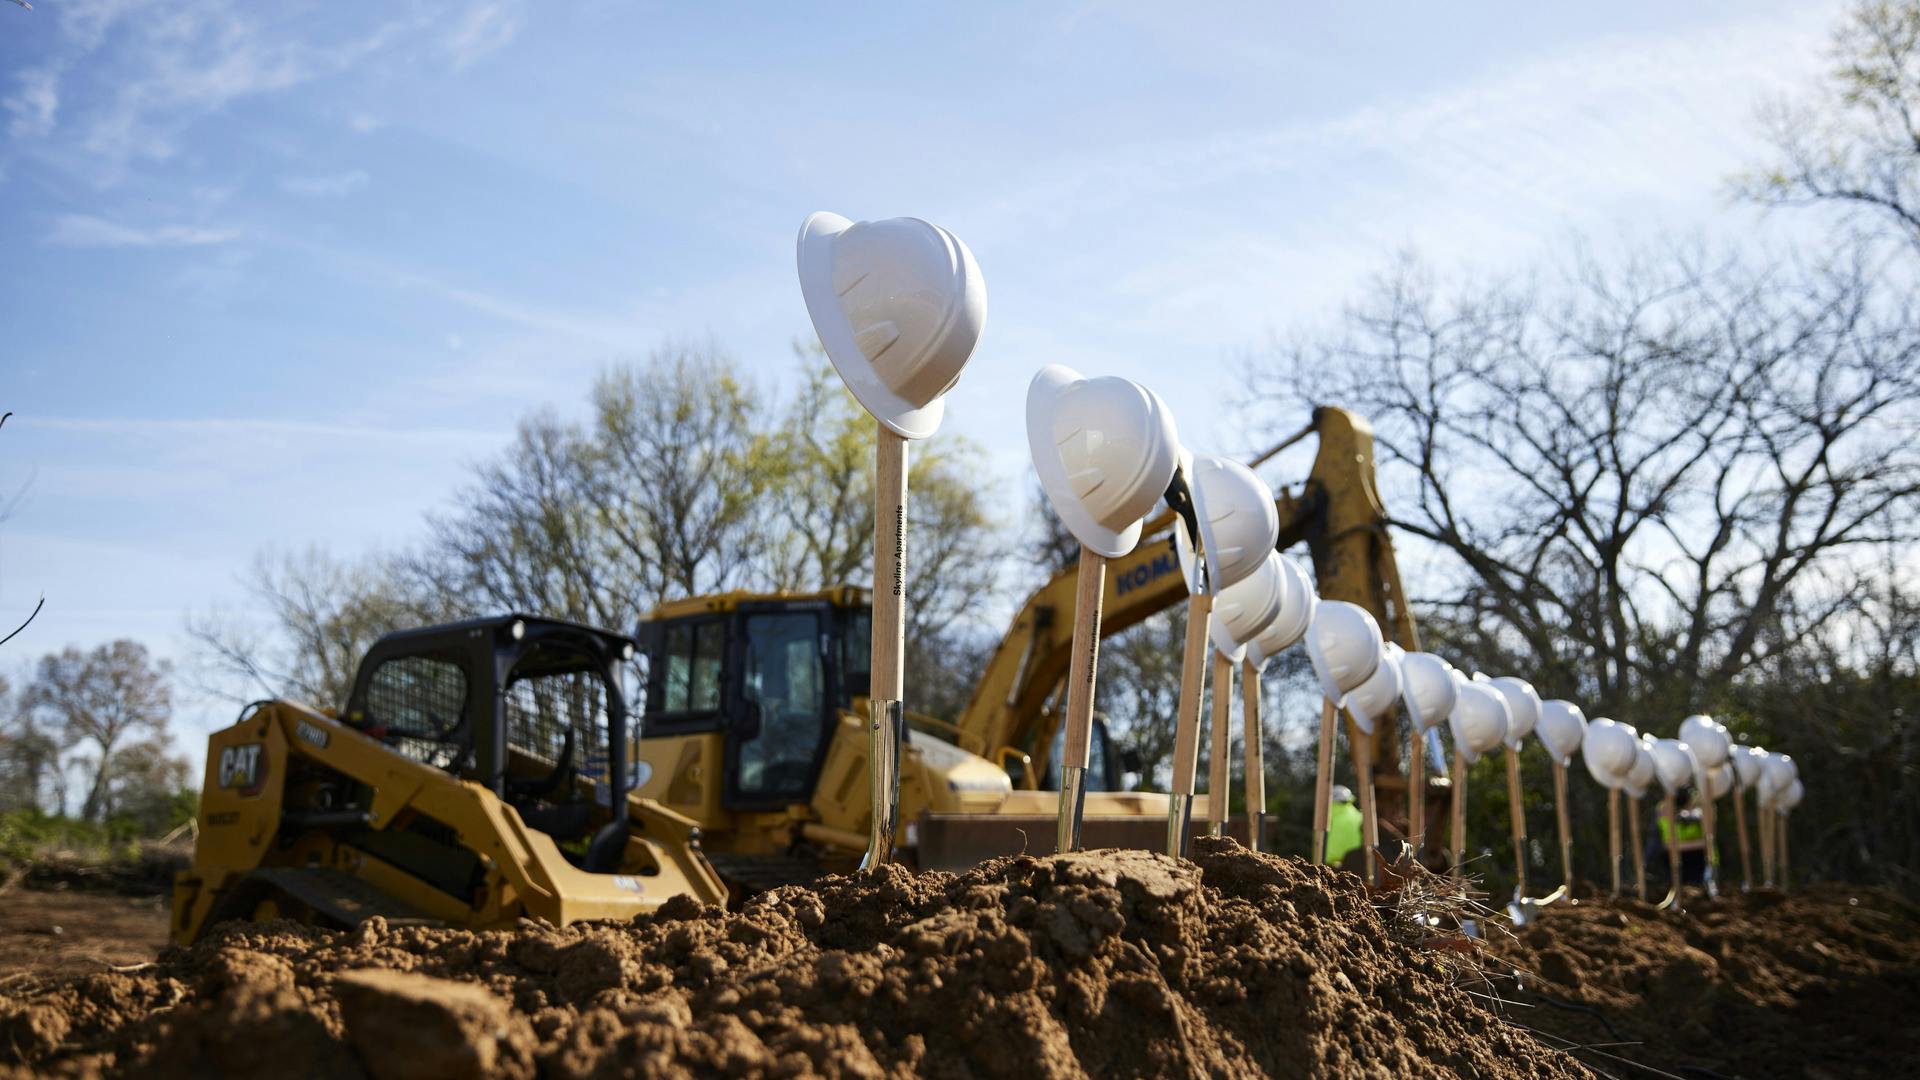 Construction equipment sits behind a line of shovels, standing in dirt, with construction hard hats balanced on top of them.